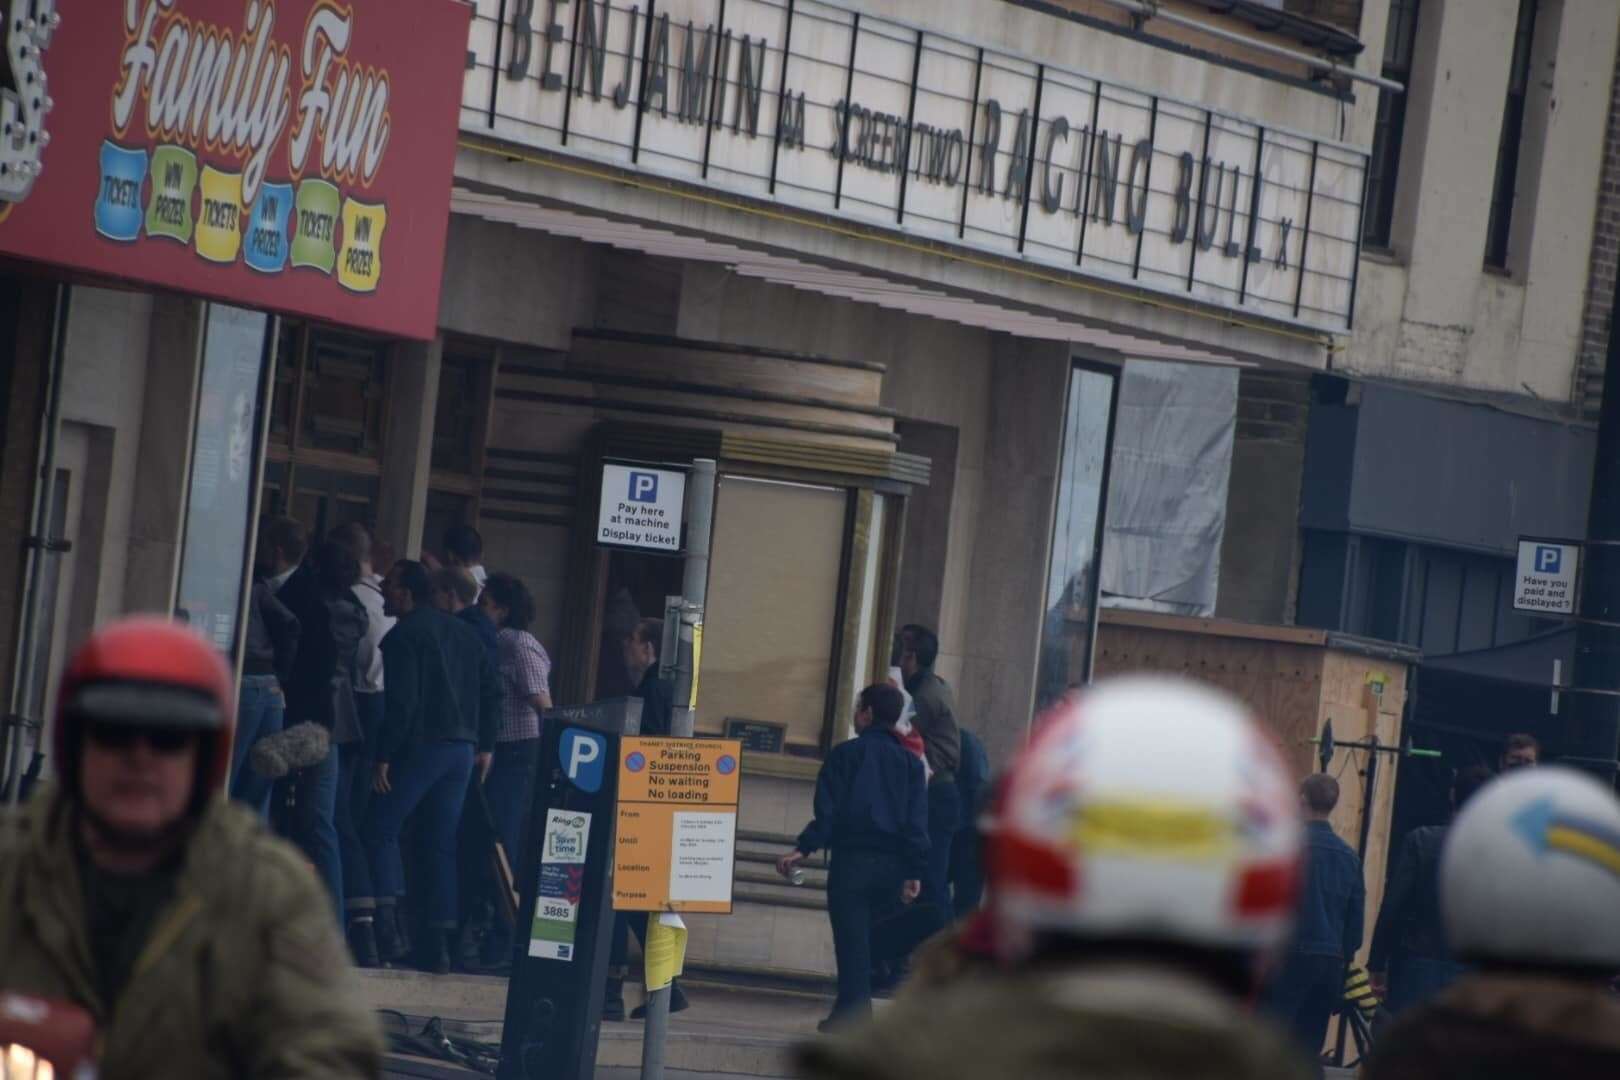 The skinheads were seen targeting the makeshift cinema in Margate during filming yesterday. Picture: Roberto Fabiani